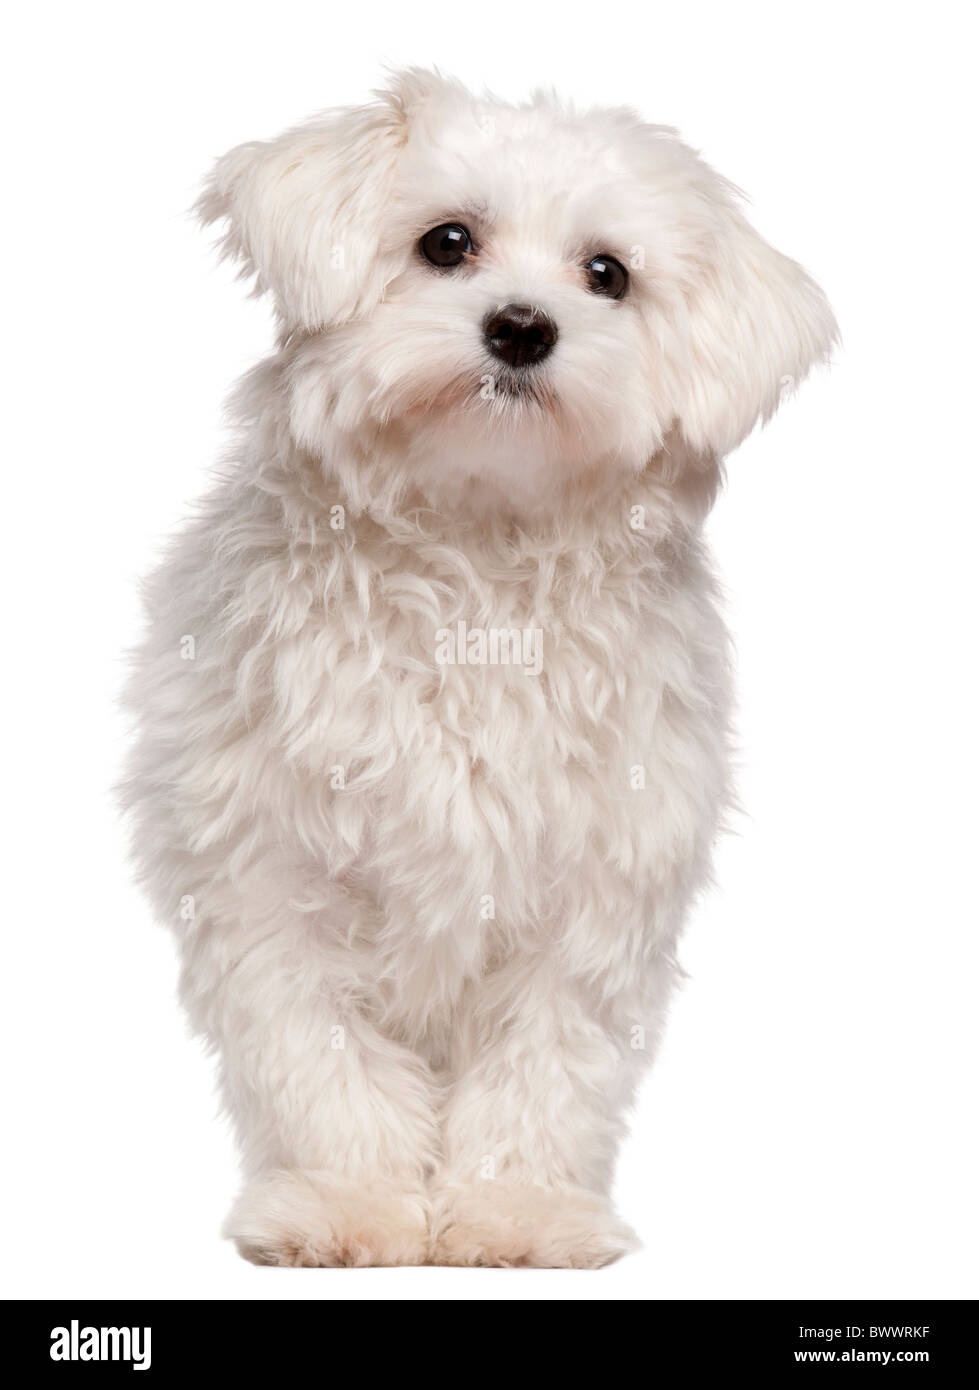 Maltese puppy, 9 months old, in front of white background Stock Photo -  Alamy